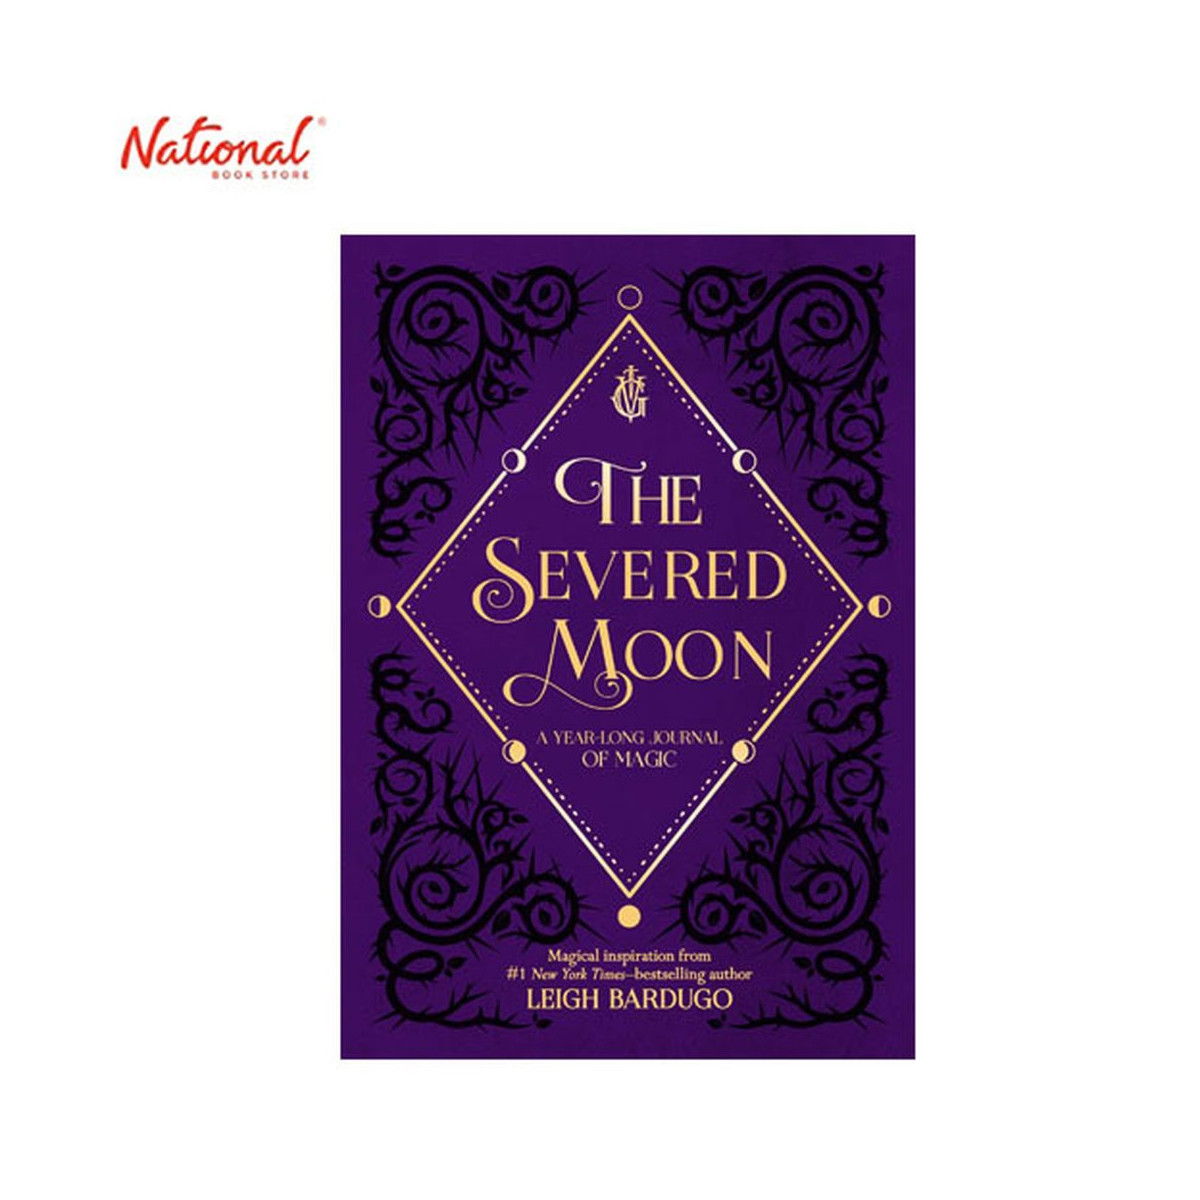 Severed Moon: A Year Long Journal Of Magic Hardcover By Leigh Bardugo